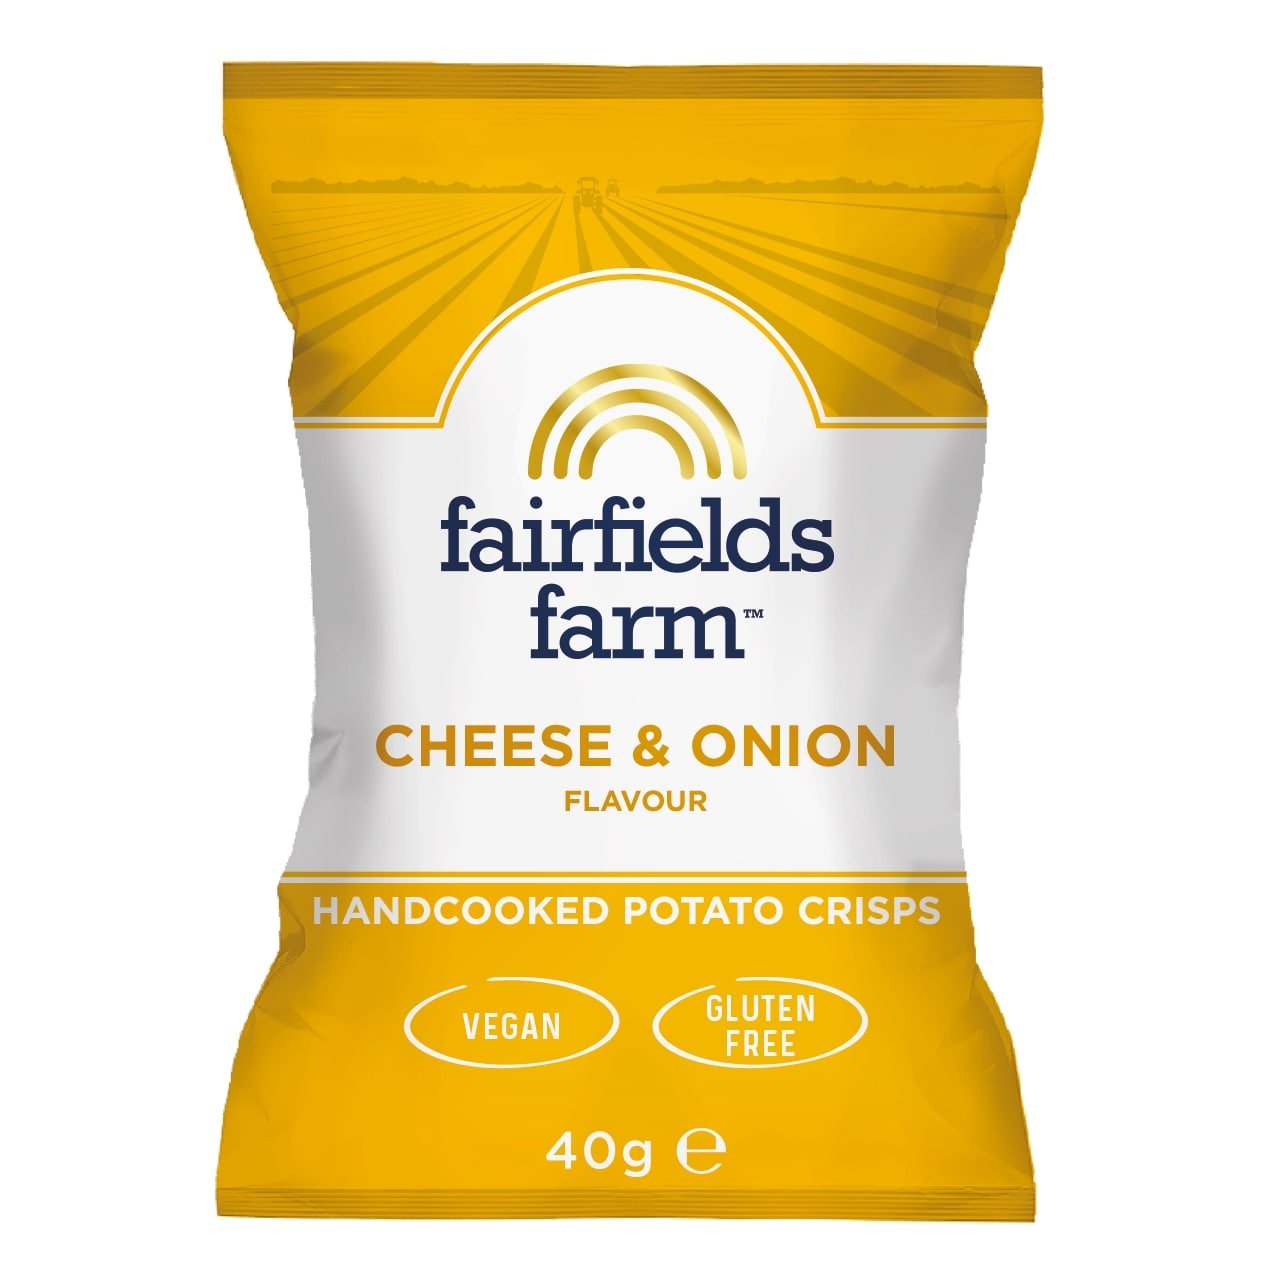 Cheese & Onion Flavour – 36 x 40g bags